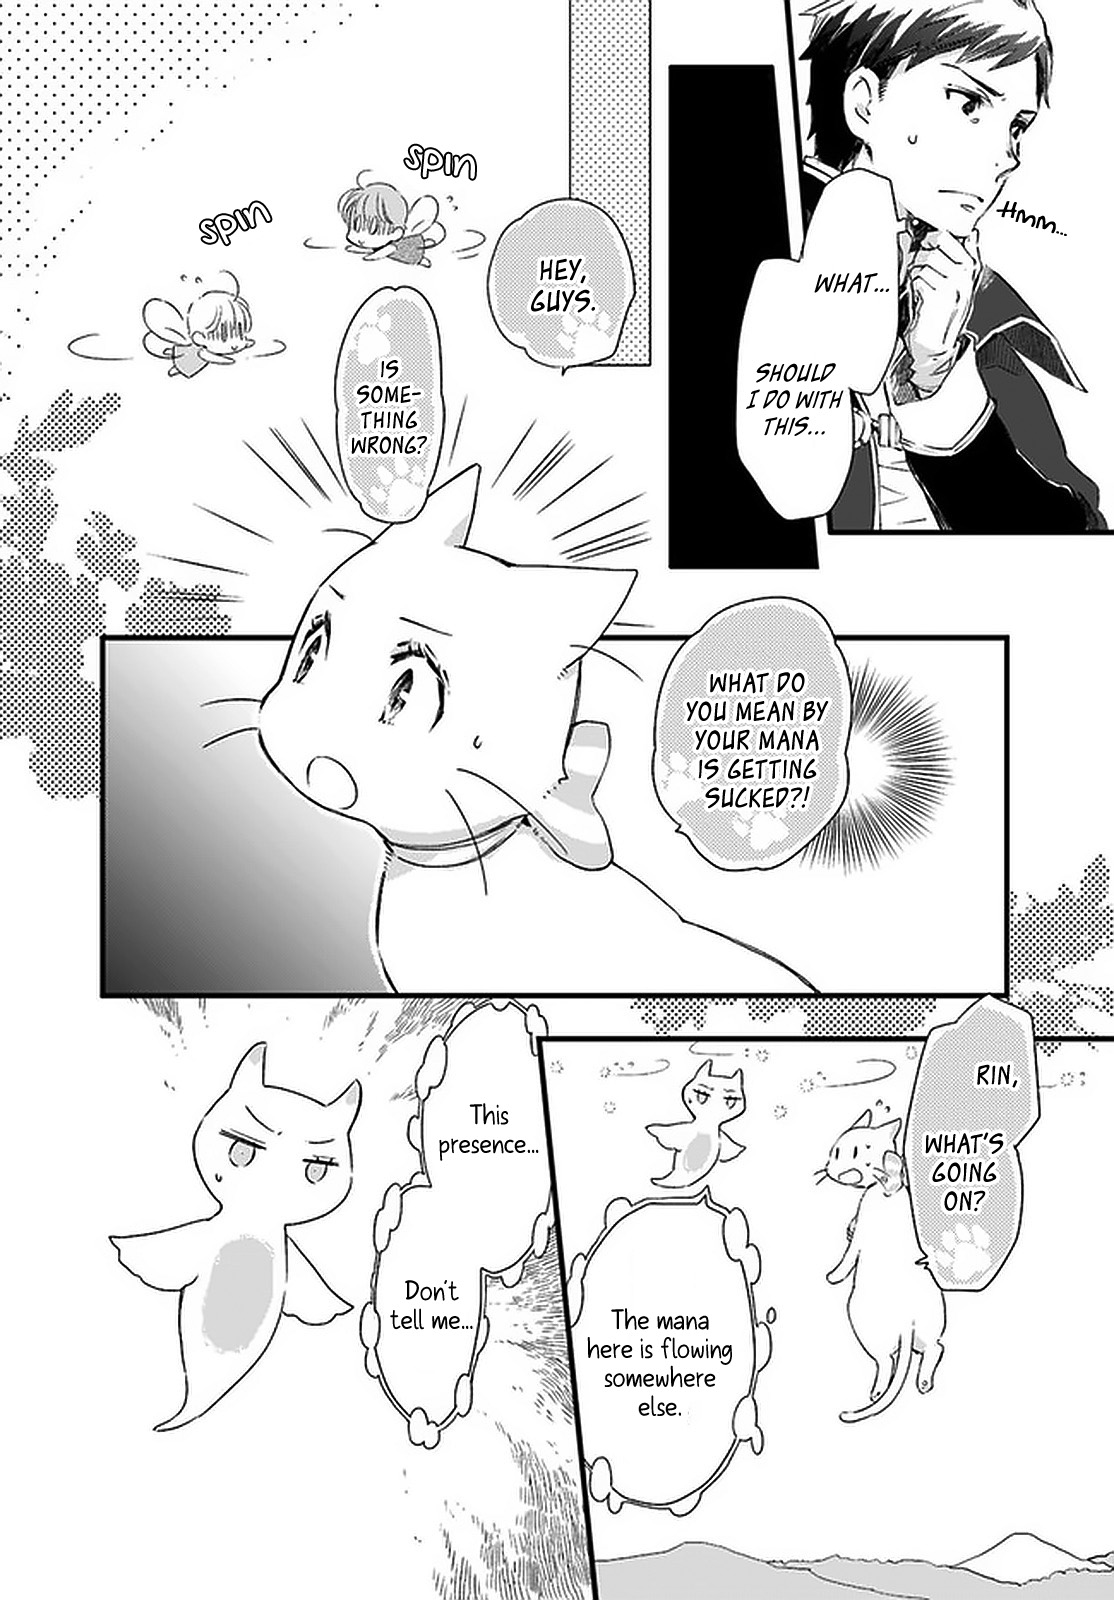 The Vengeful White Cat Lounging On The Dragon King's Lap - Page 2